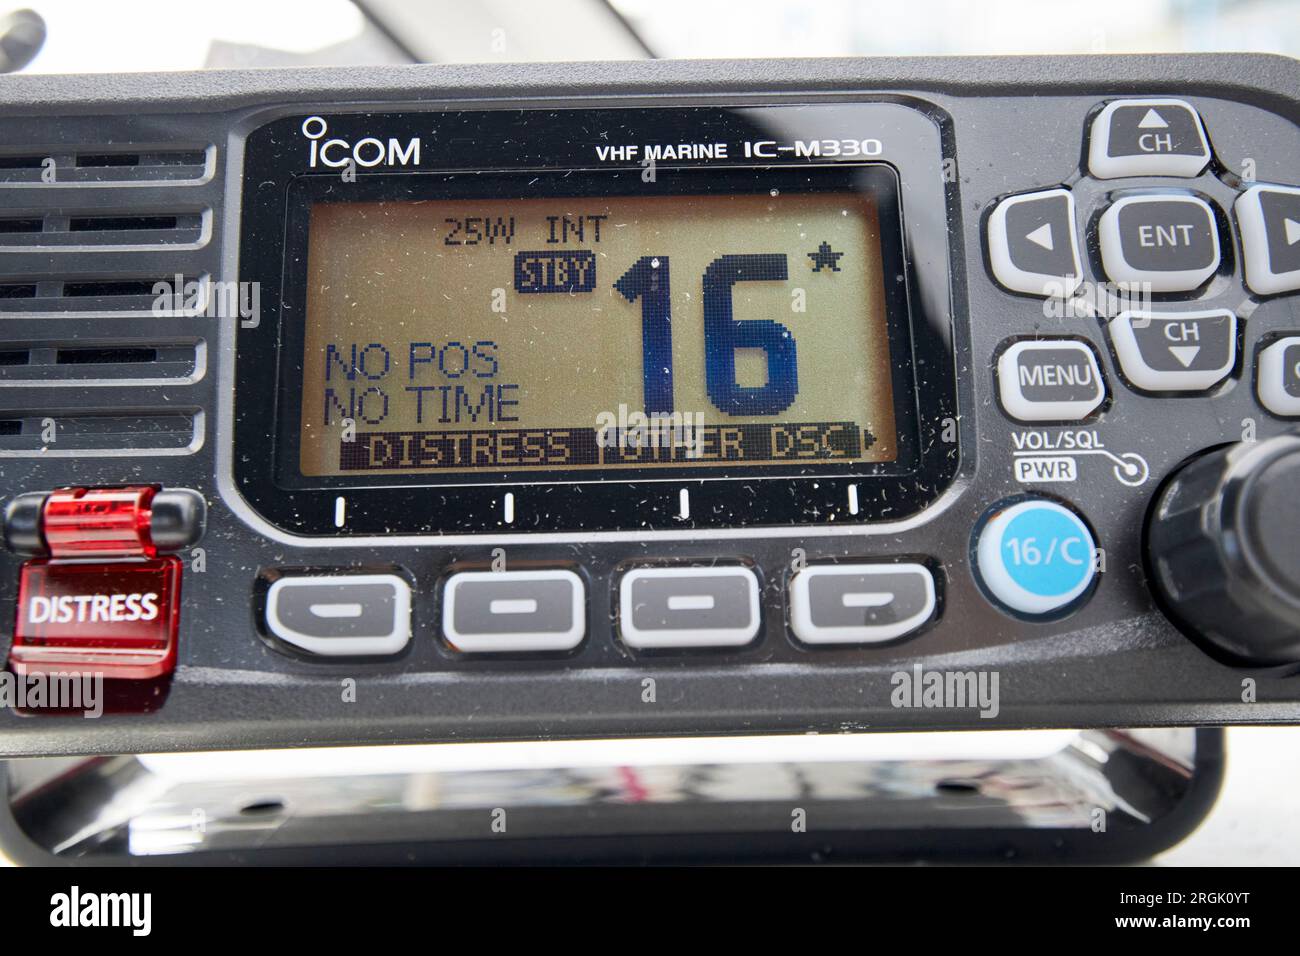 emergency dsc vhf radio tuned to channel 16 on a small boat in the uk Stock Photo